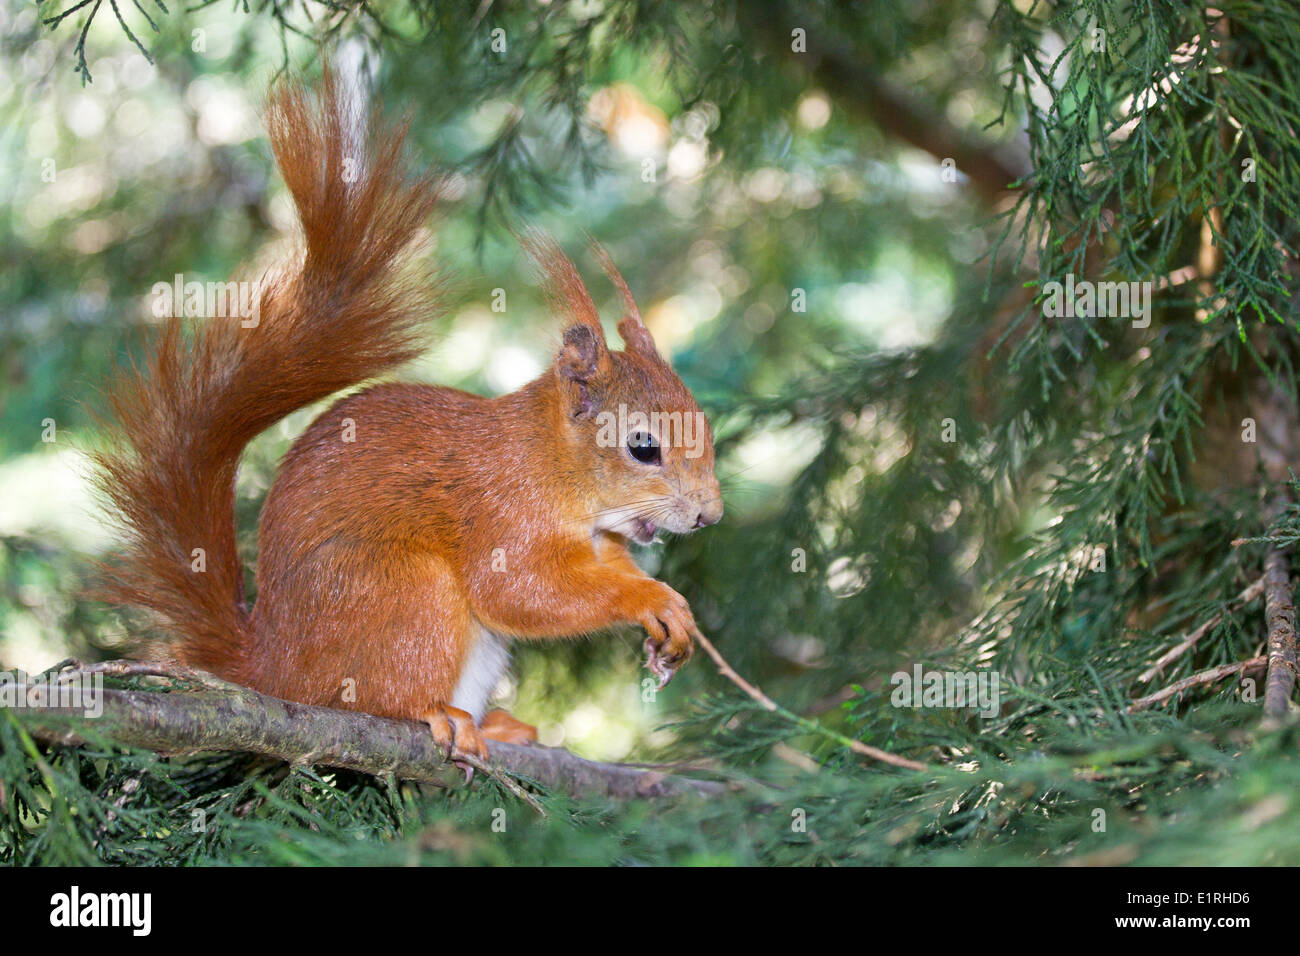 photo of eating a red squirrel in a pine tree Stock Photo